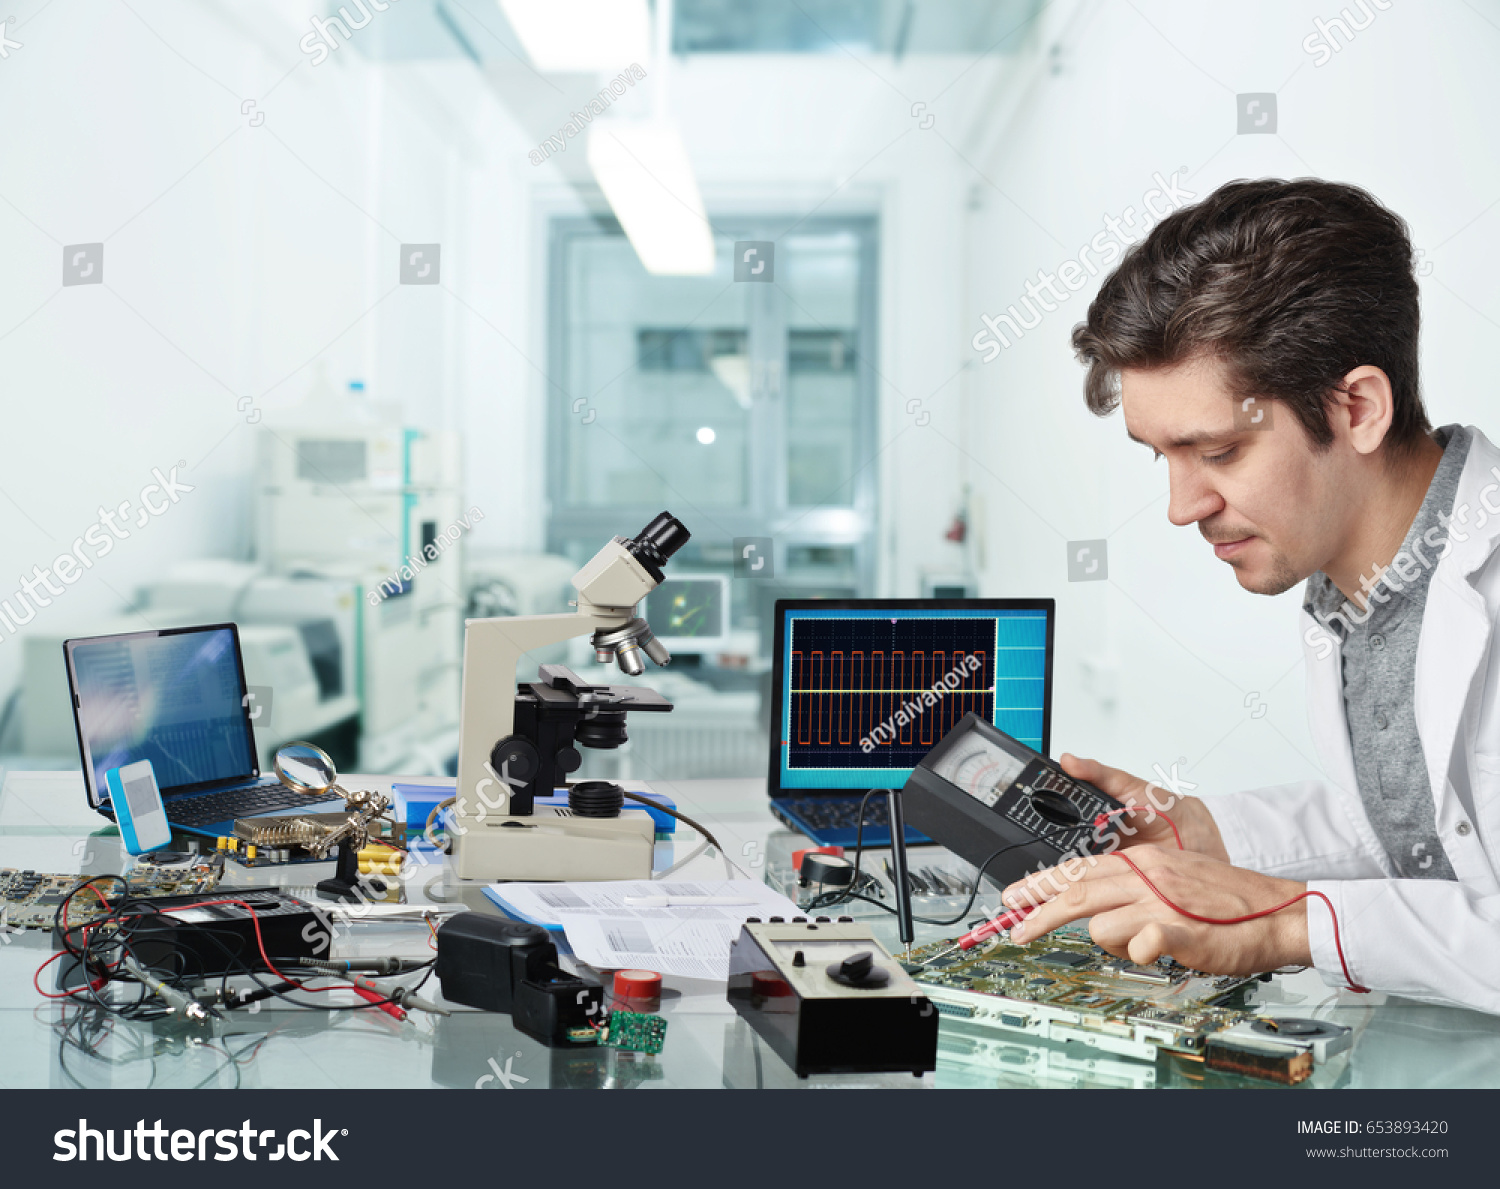 Young energetic male tech or engineer repairs electronic equipment in research facility. Shallow DOF, focus on the face of the worker. #653893420